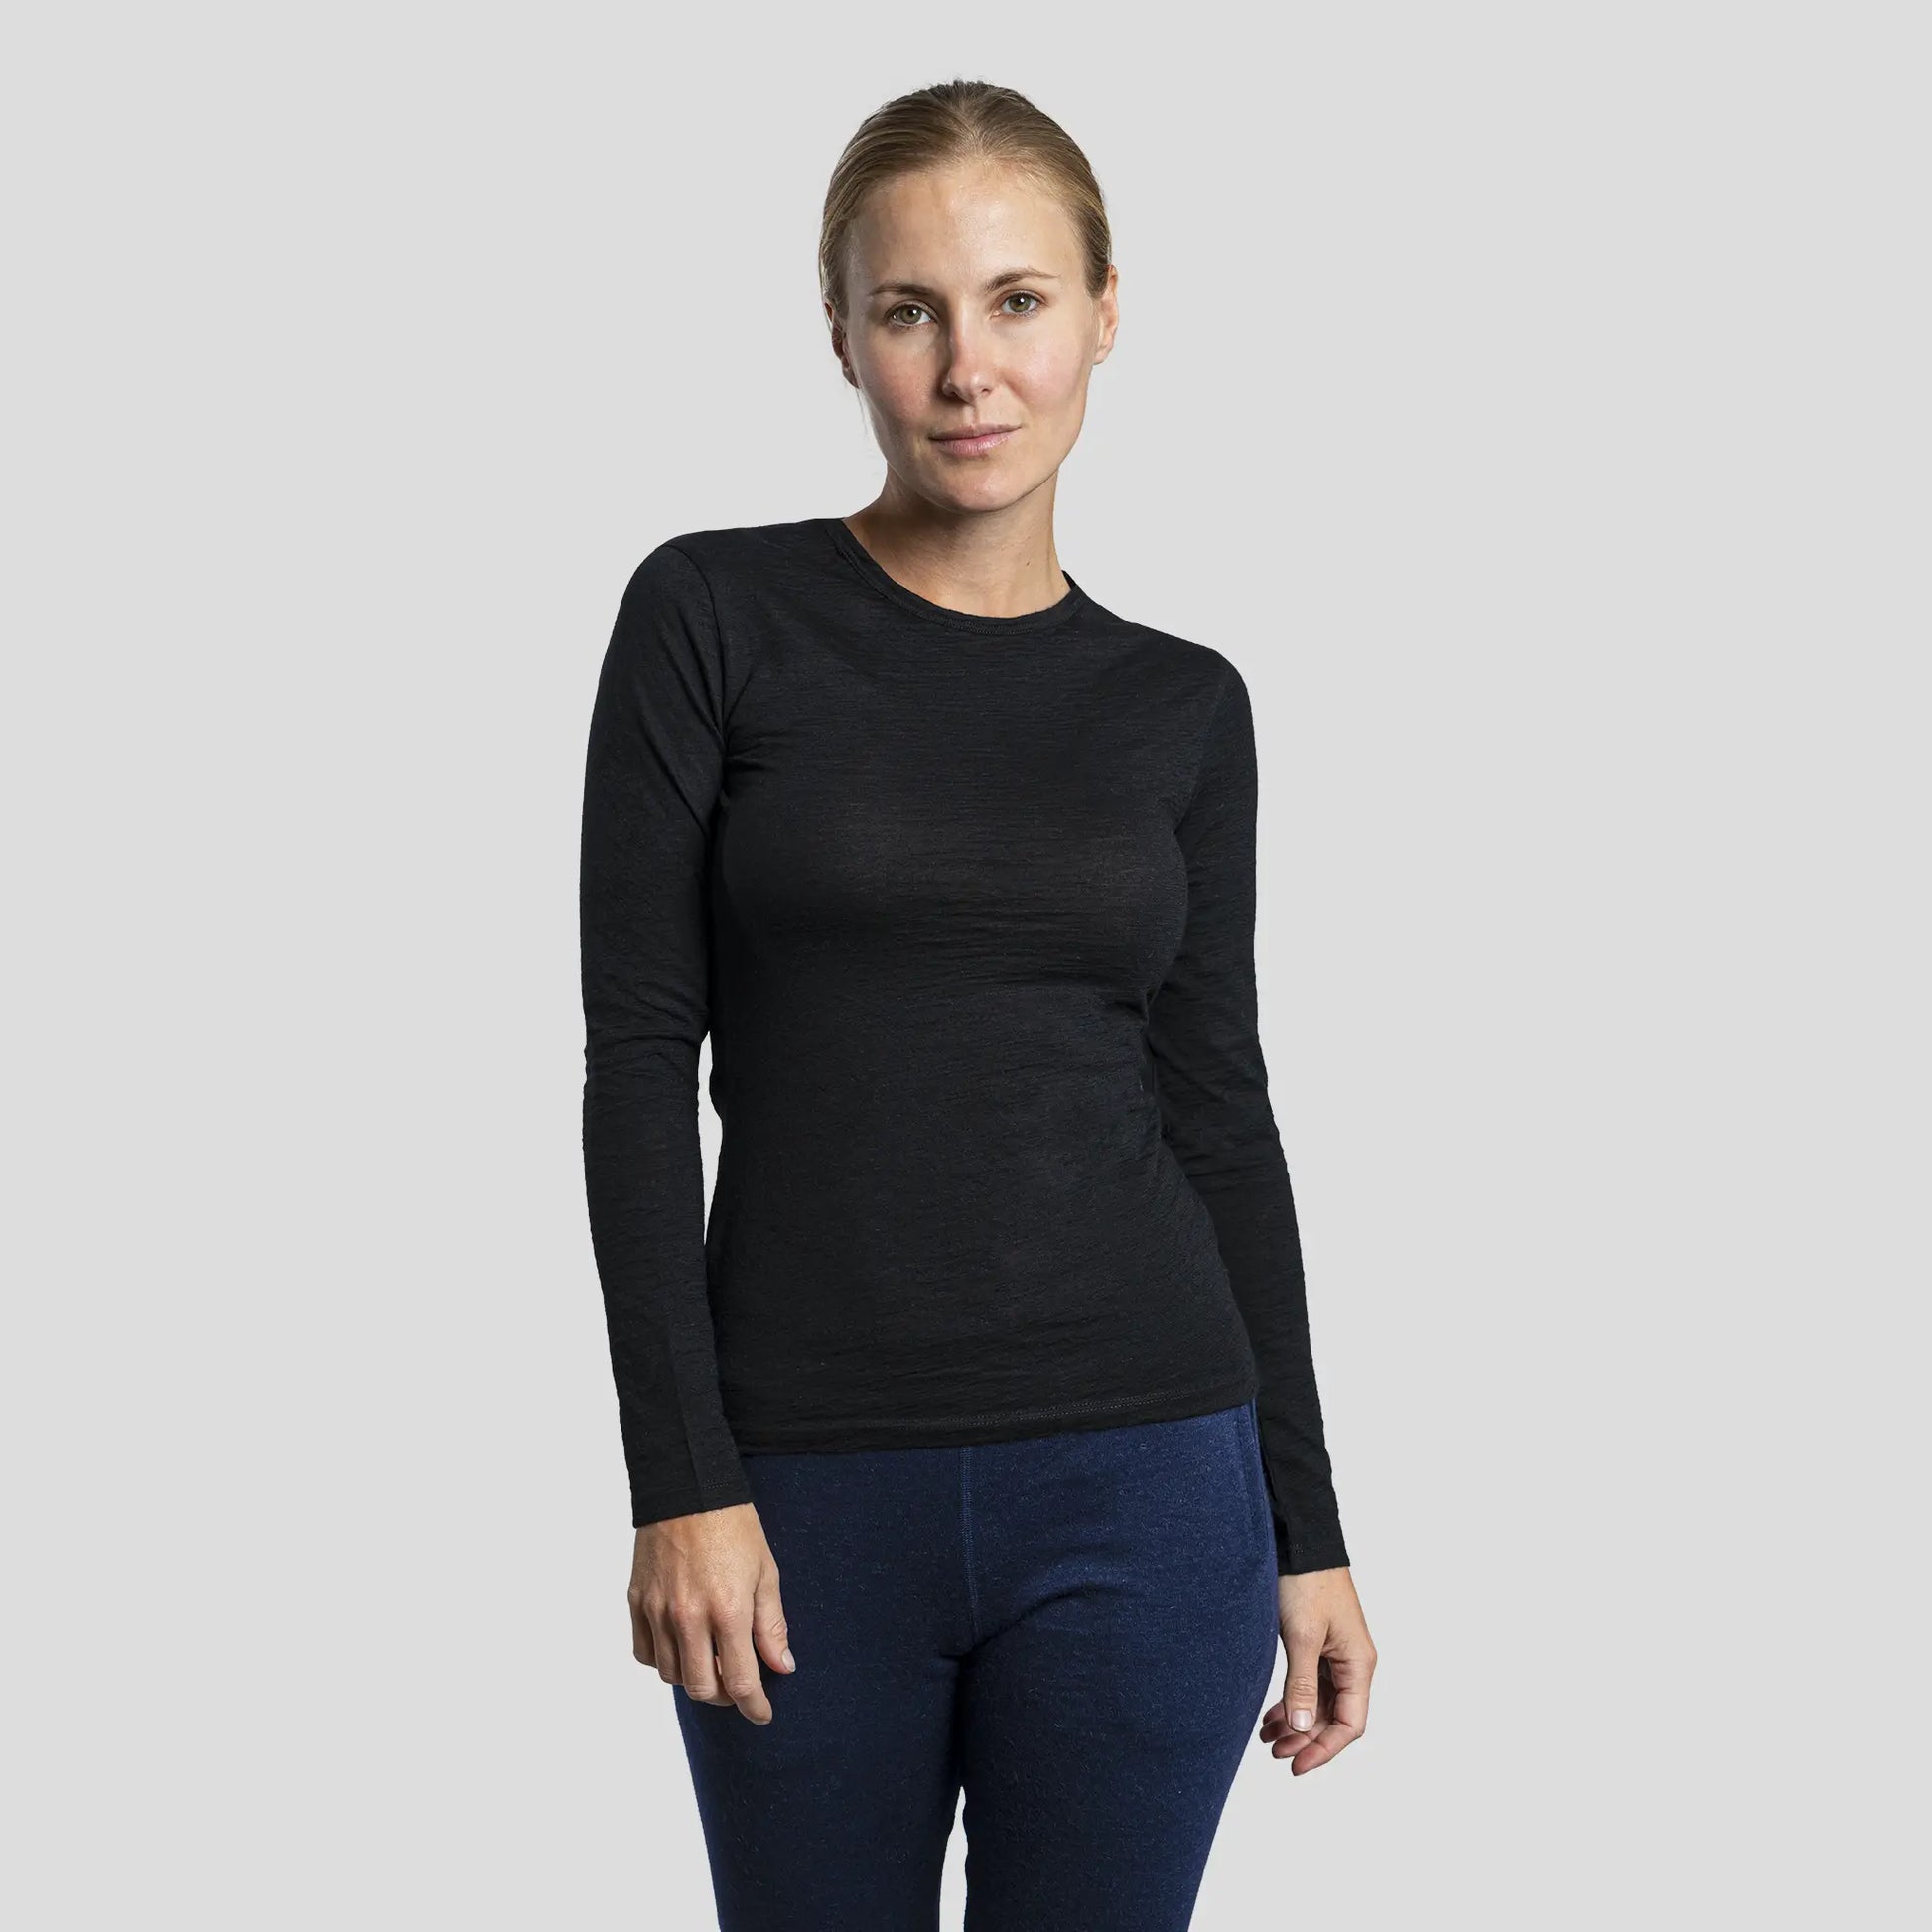 Womens Long Sleeve Sport Top Line For Body And Arm Slimming And